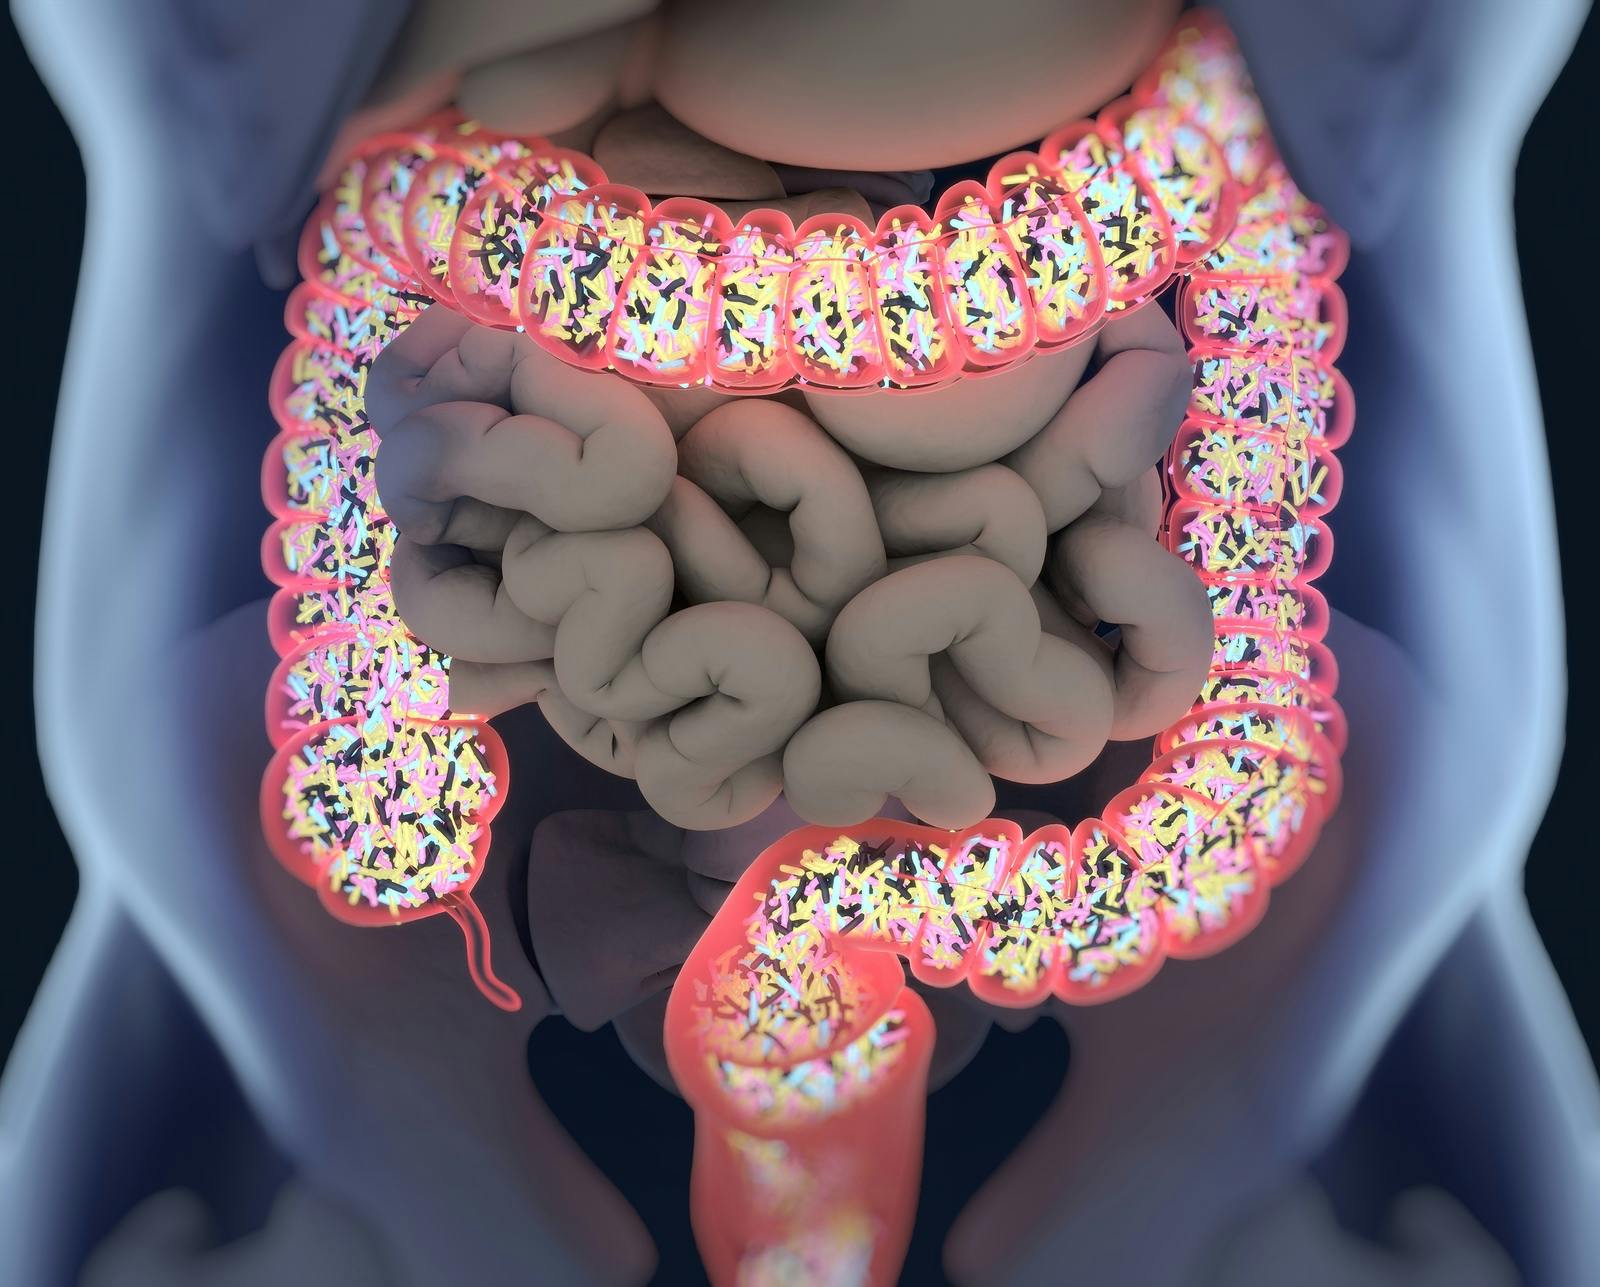 illustration of microbiota within the large intestine containing colon bacteria